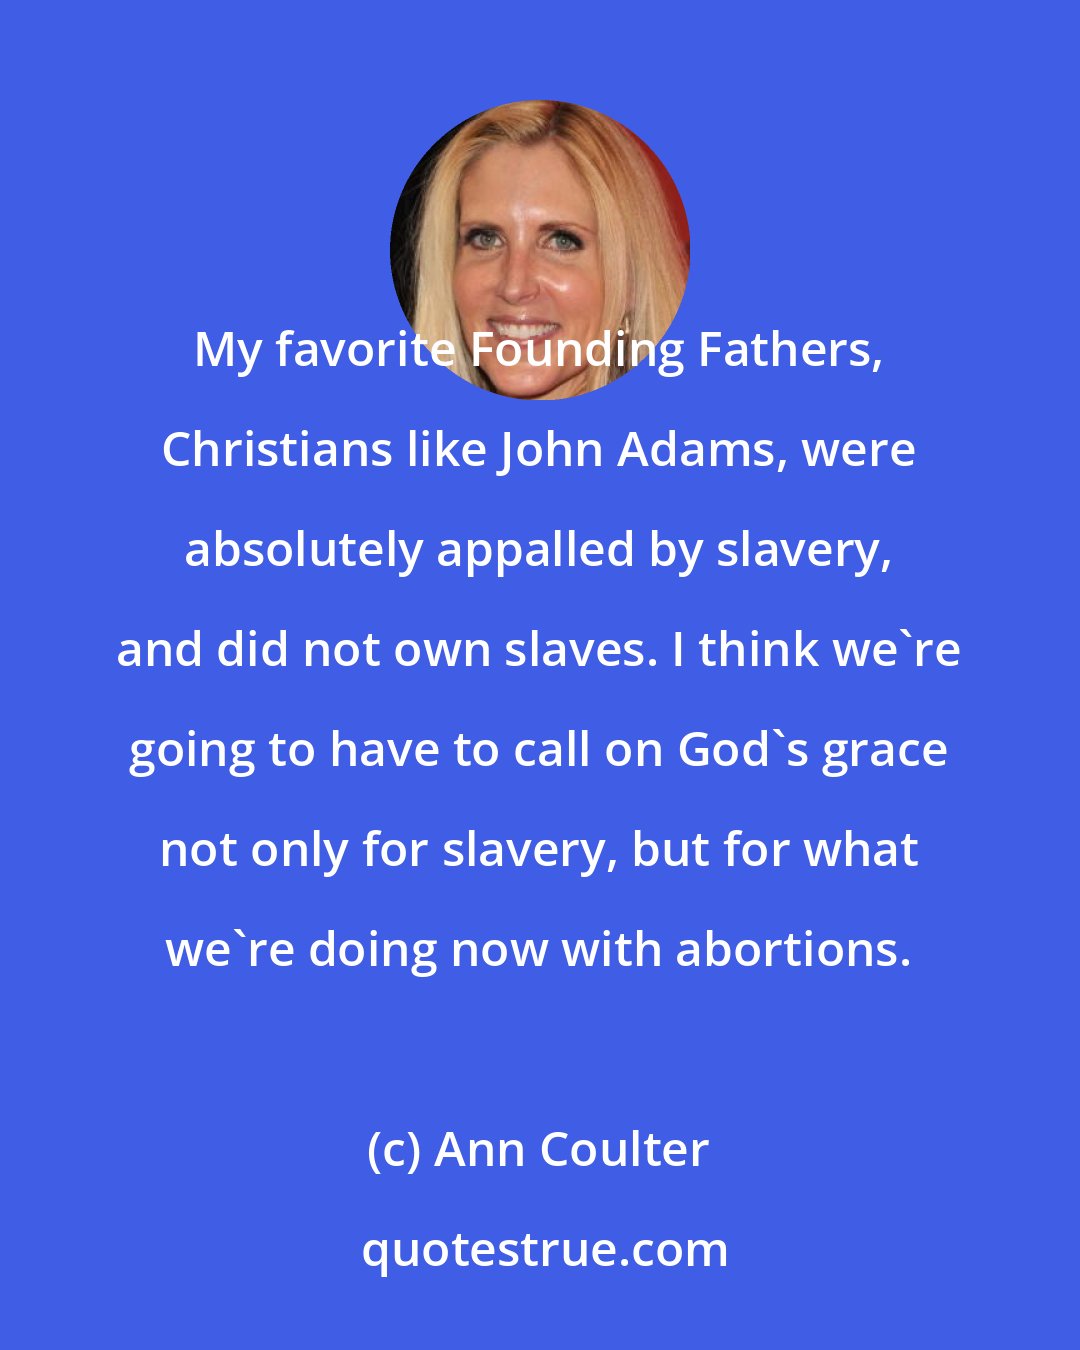 Ann Coulter: My favorite Founding Fathers, Christians like John Adams, were absolutely appalled by slavery, and did not own slaves. I think we're going to have to call on God's grace not only for slavery, but for what we're doing now with abortions.